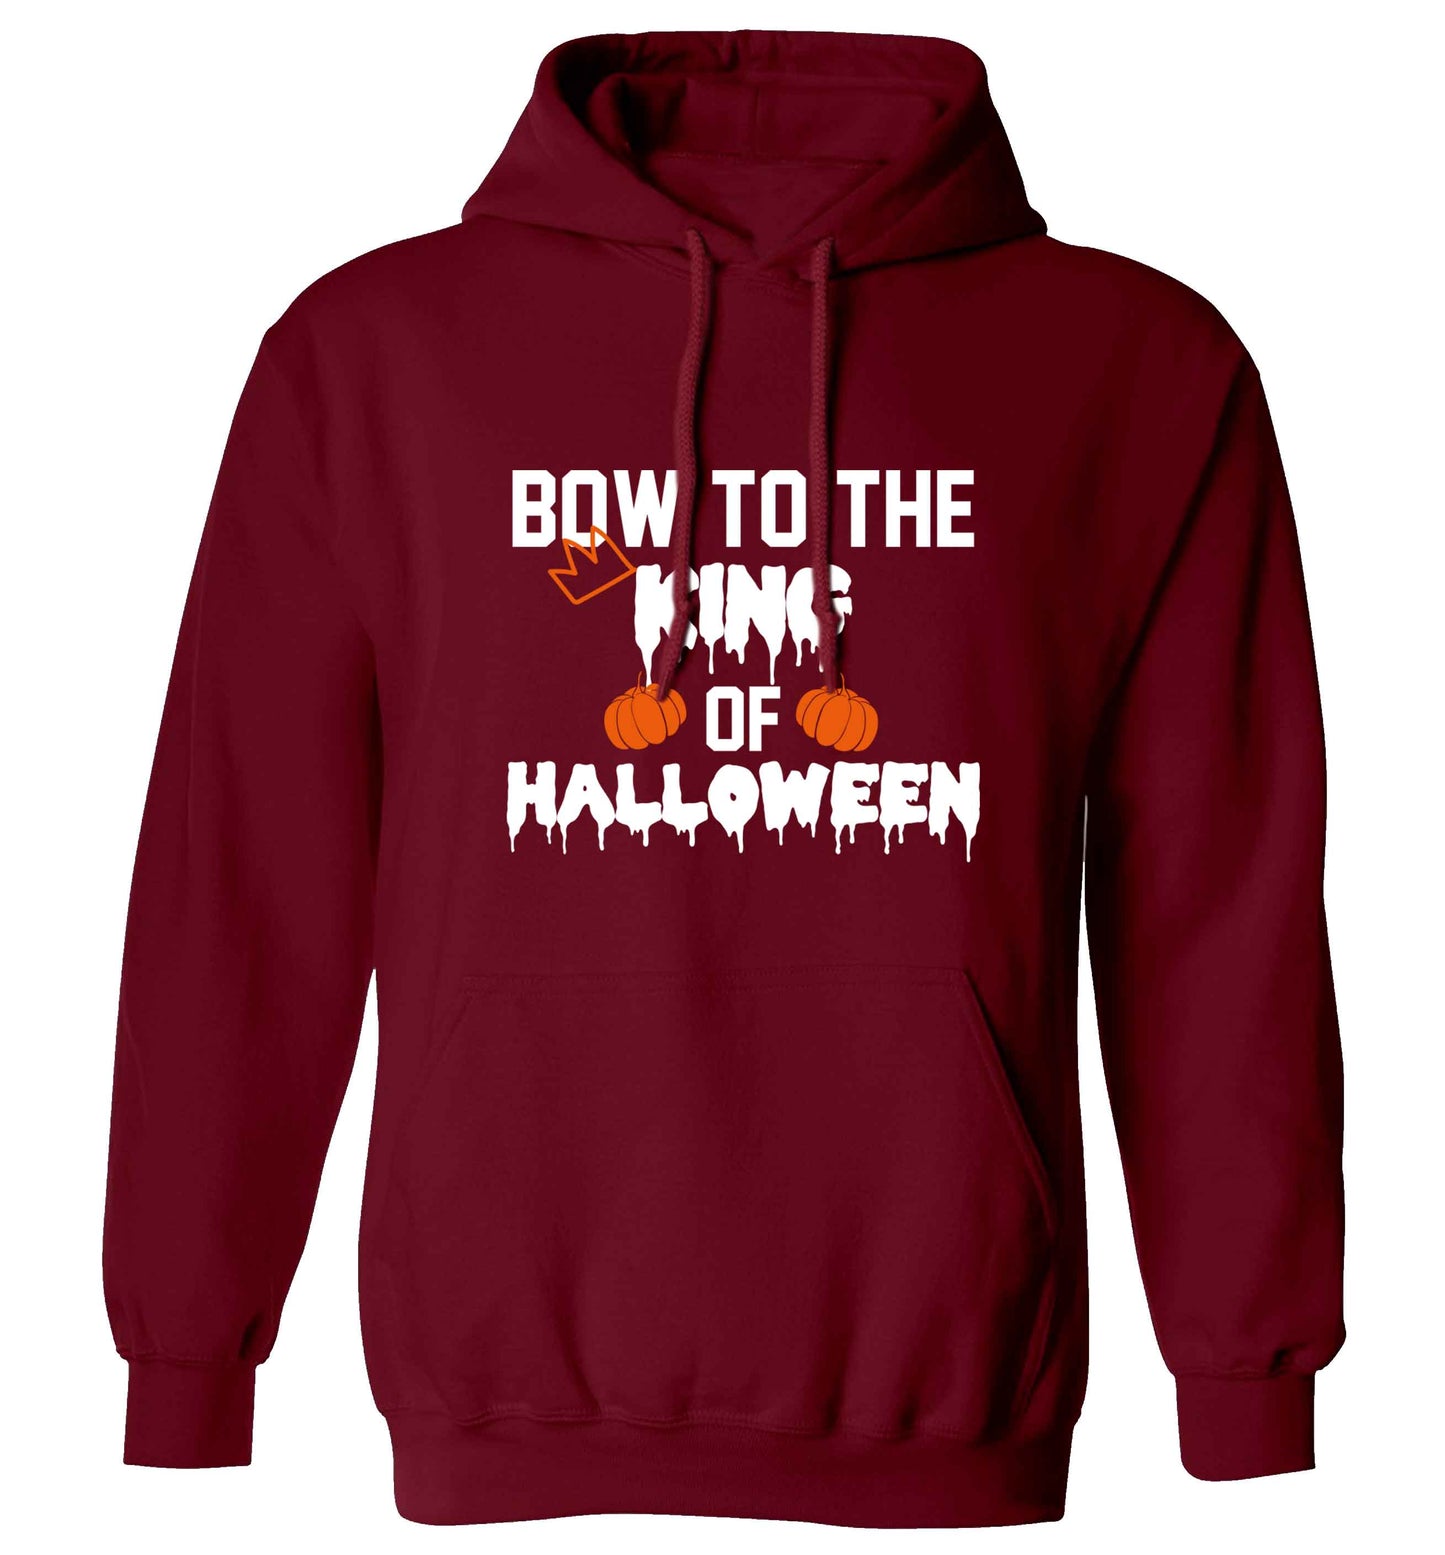 Bow to the King of halloween adults unisex maroon hoodie 2XL